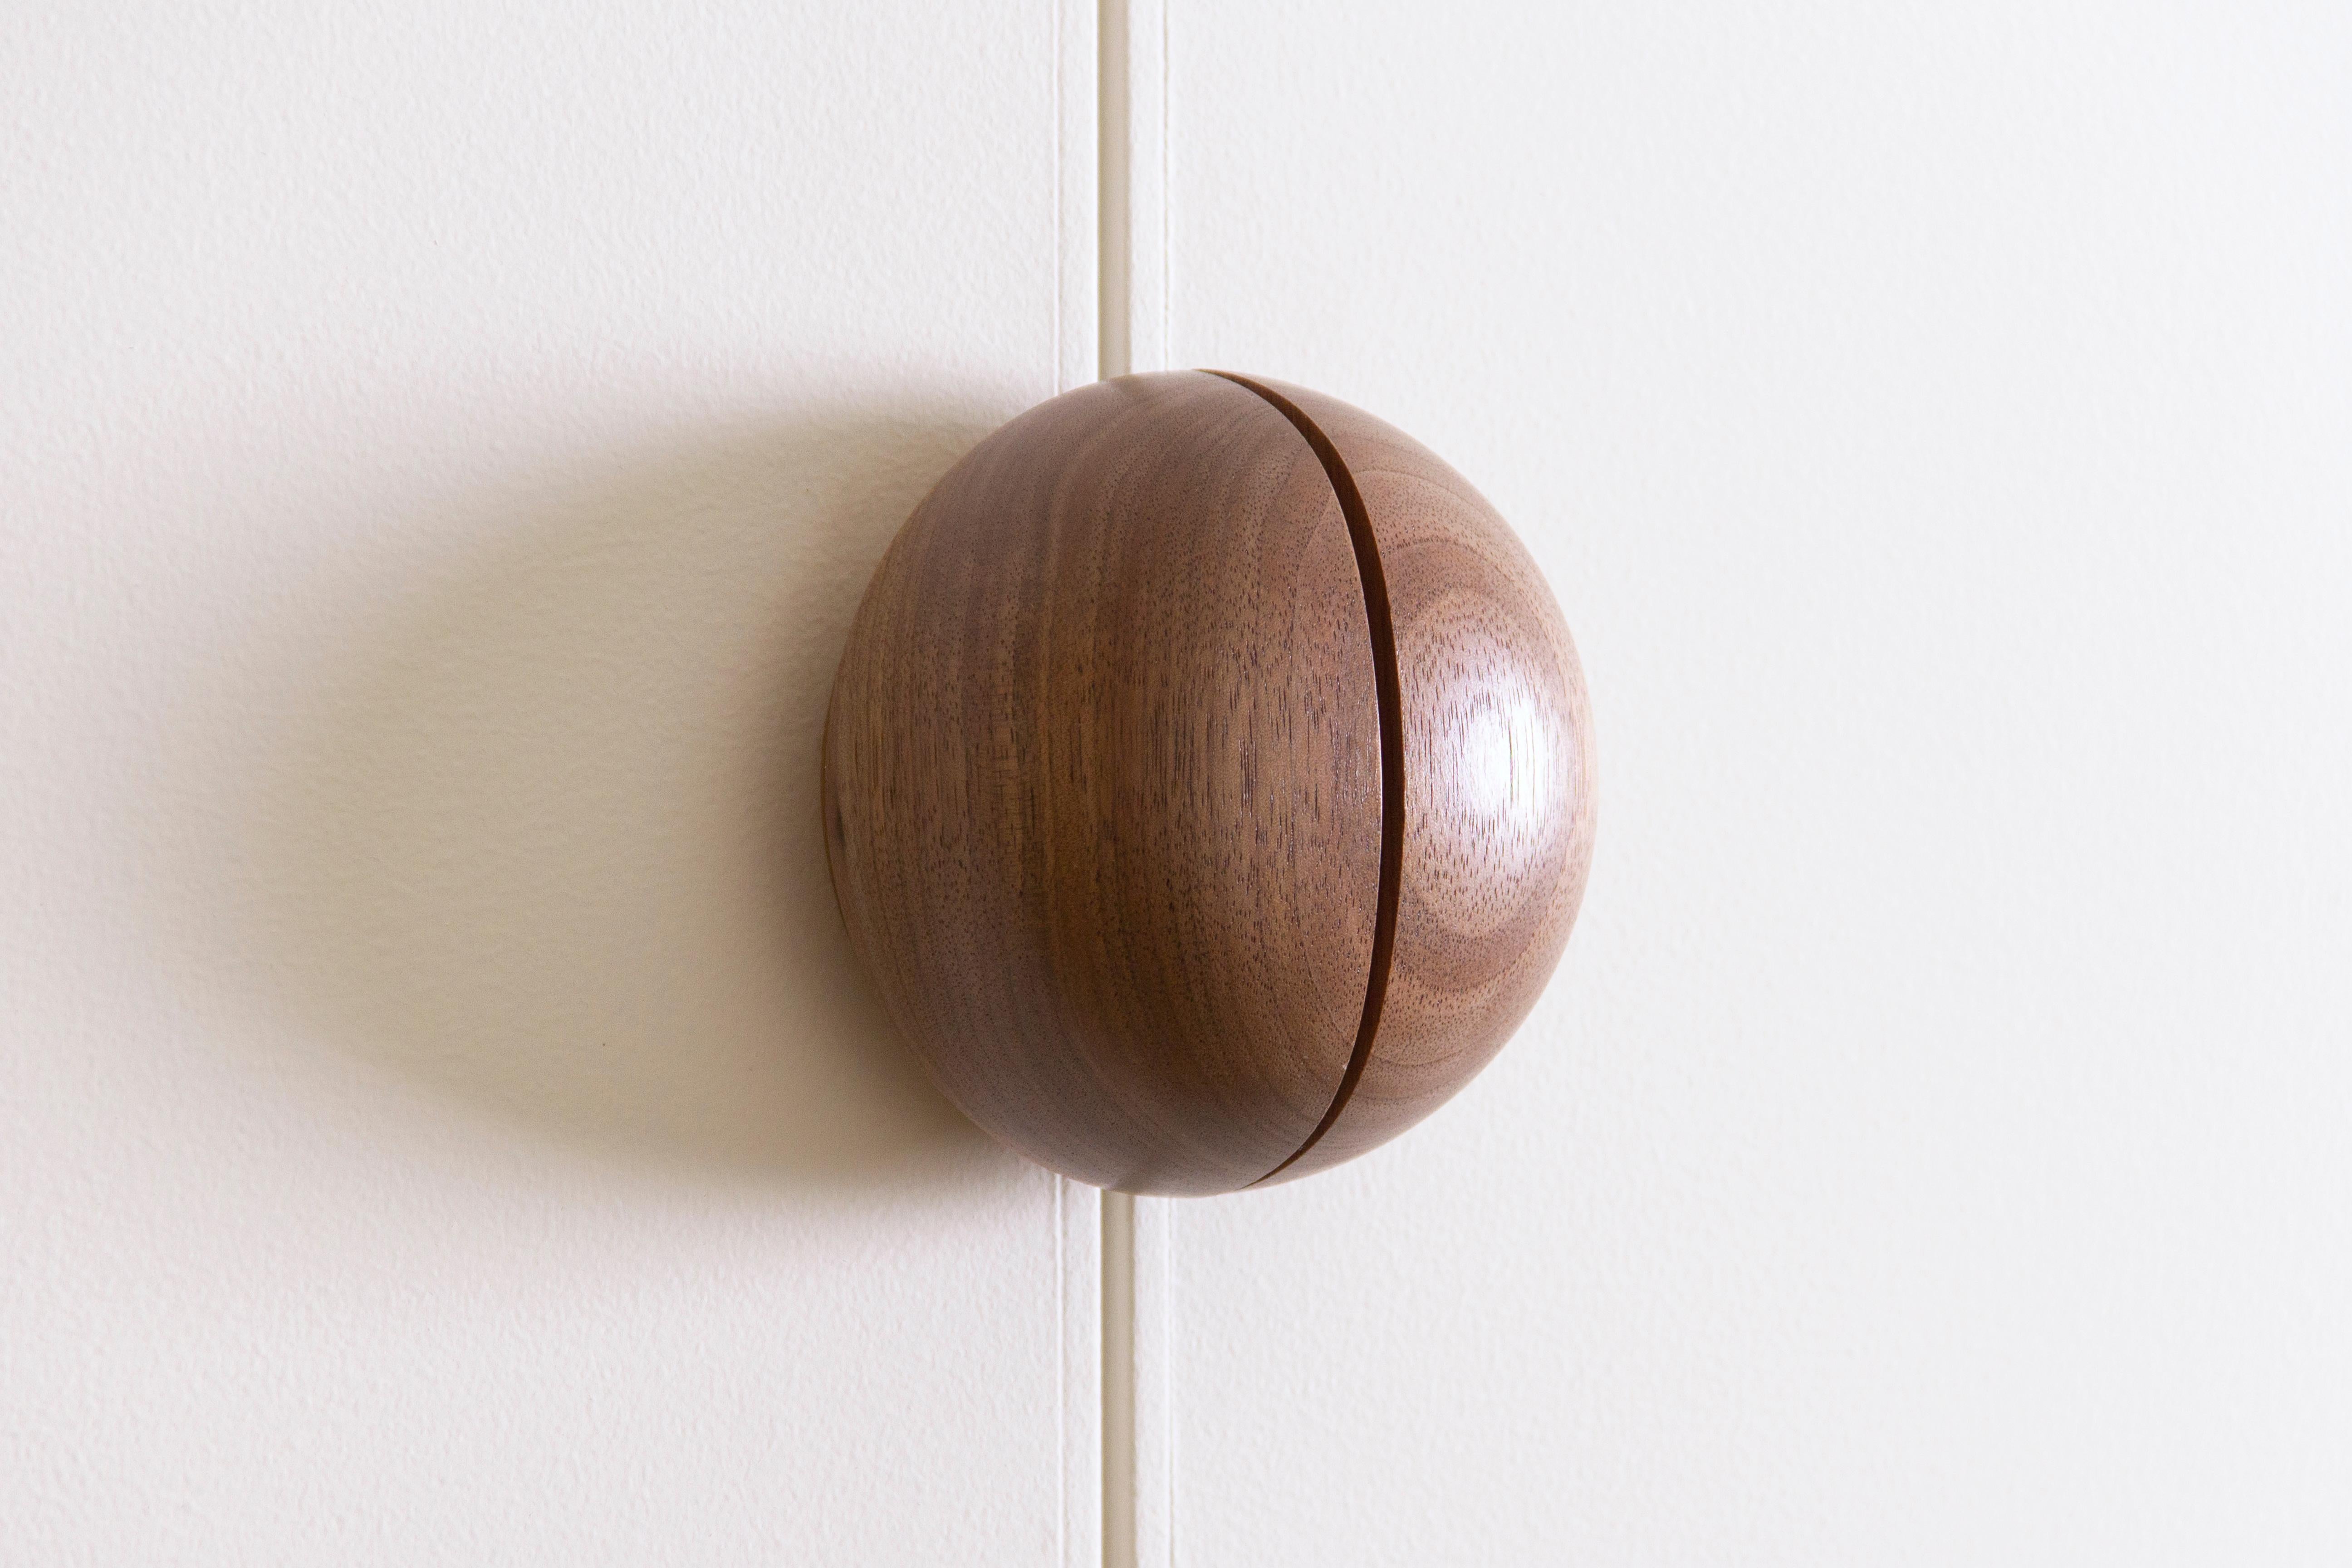 Solid walnut handles for double doors (must open outwards). Sold with appropriate length screws for mounting, so please inform us of the width of your doors after ordering.

Materials: Walnut, brass screws

Also available in a larger size